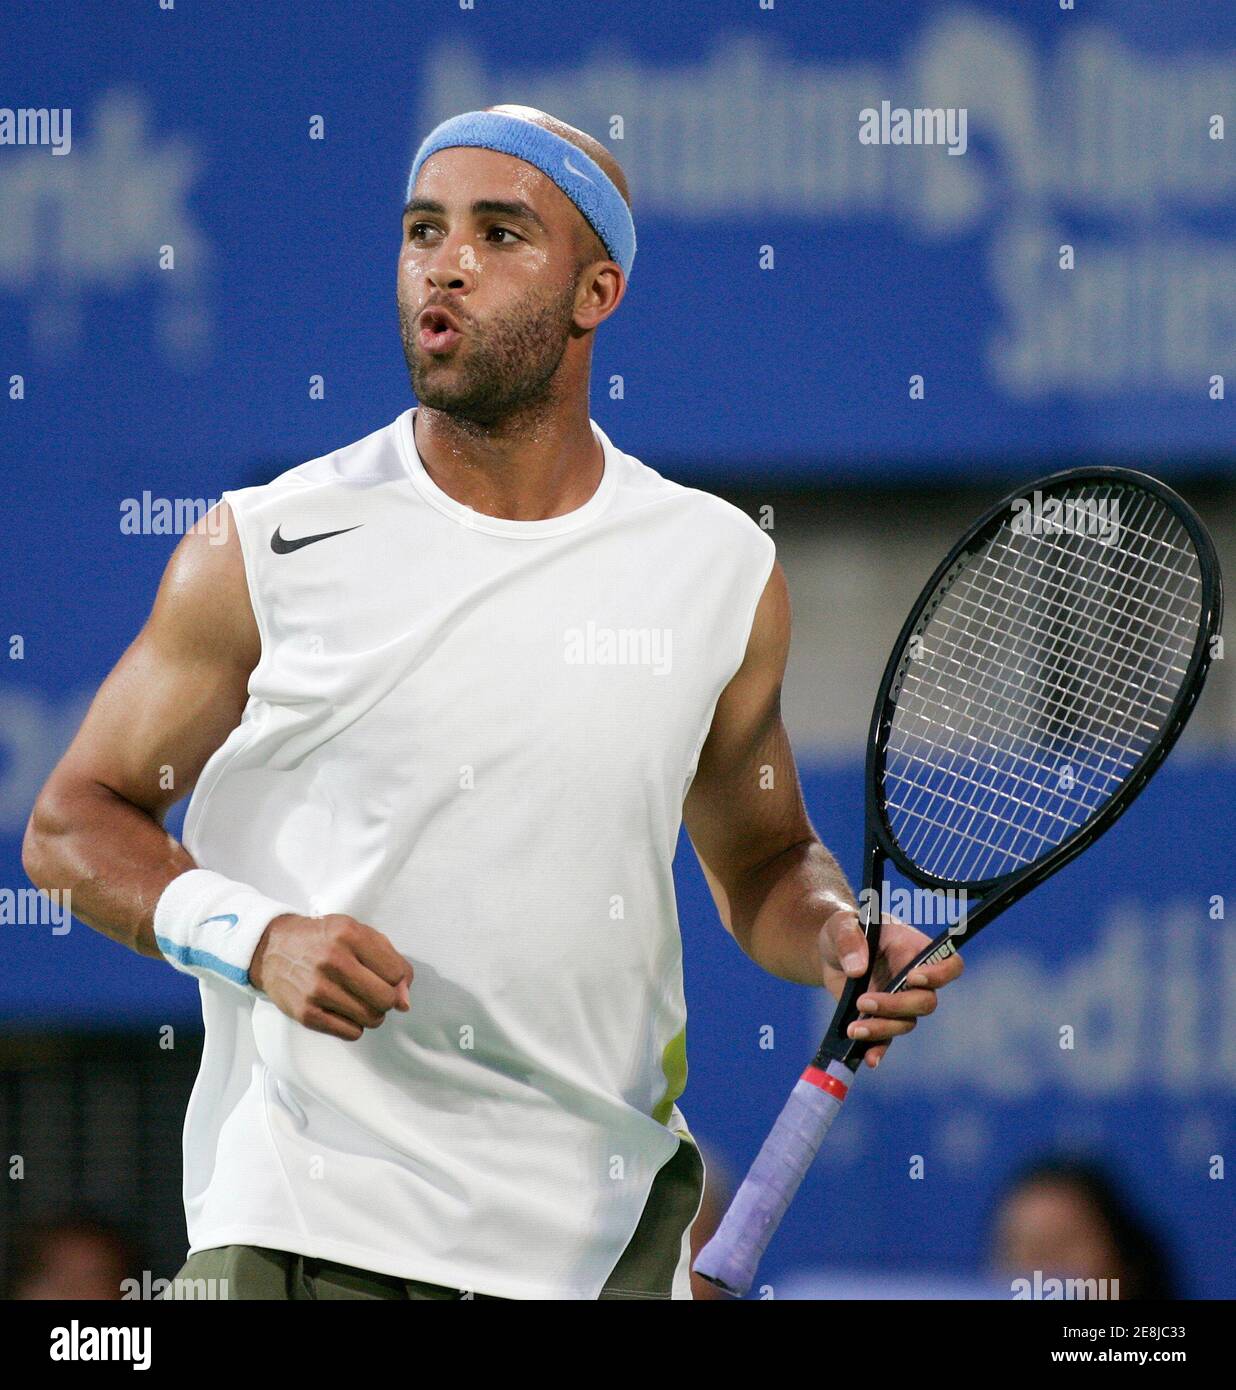 James Blake of the U.S. reacts after winning a point during his win over Carlos Moya of Spain in the Men's Singles title of the Sydney International Tennis Tournament at Olympic Park in Sydney January 13, 2007. REUTERS/Will Burgess  (AUSTRALIA) Stock Photo